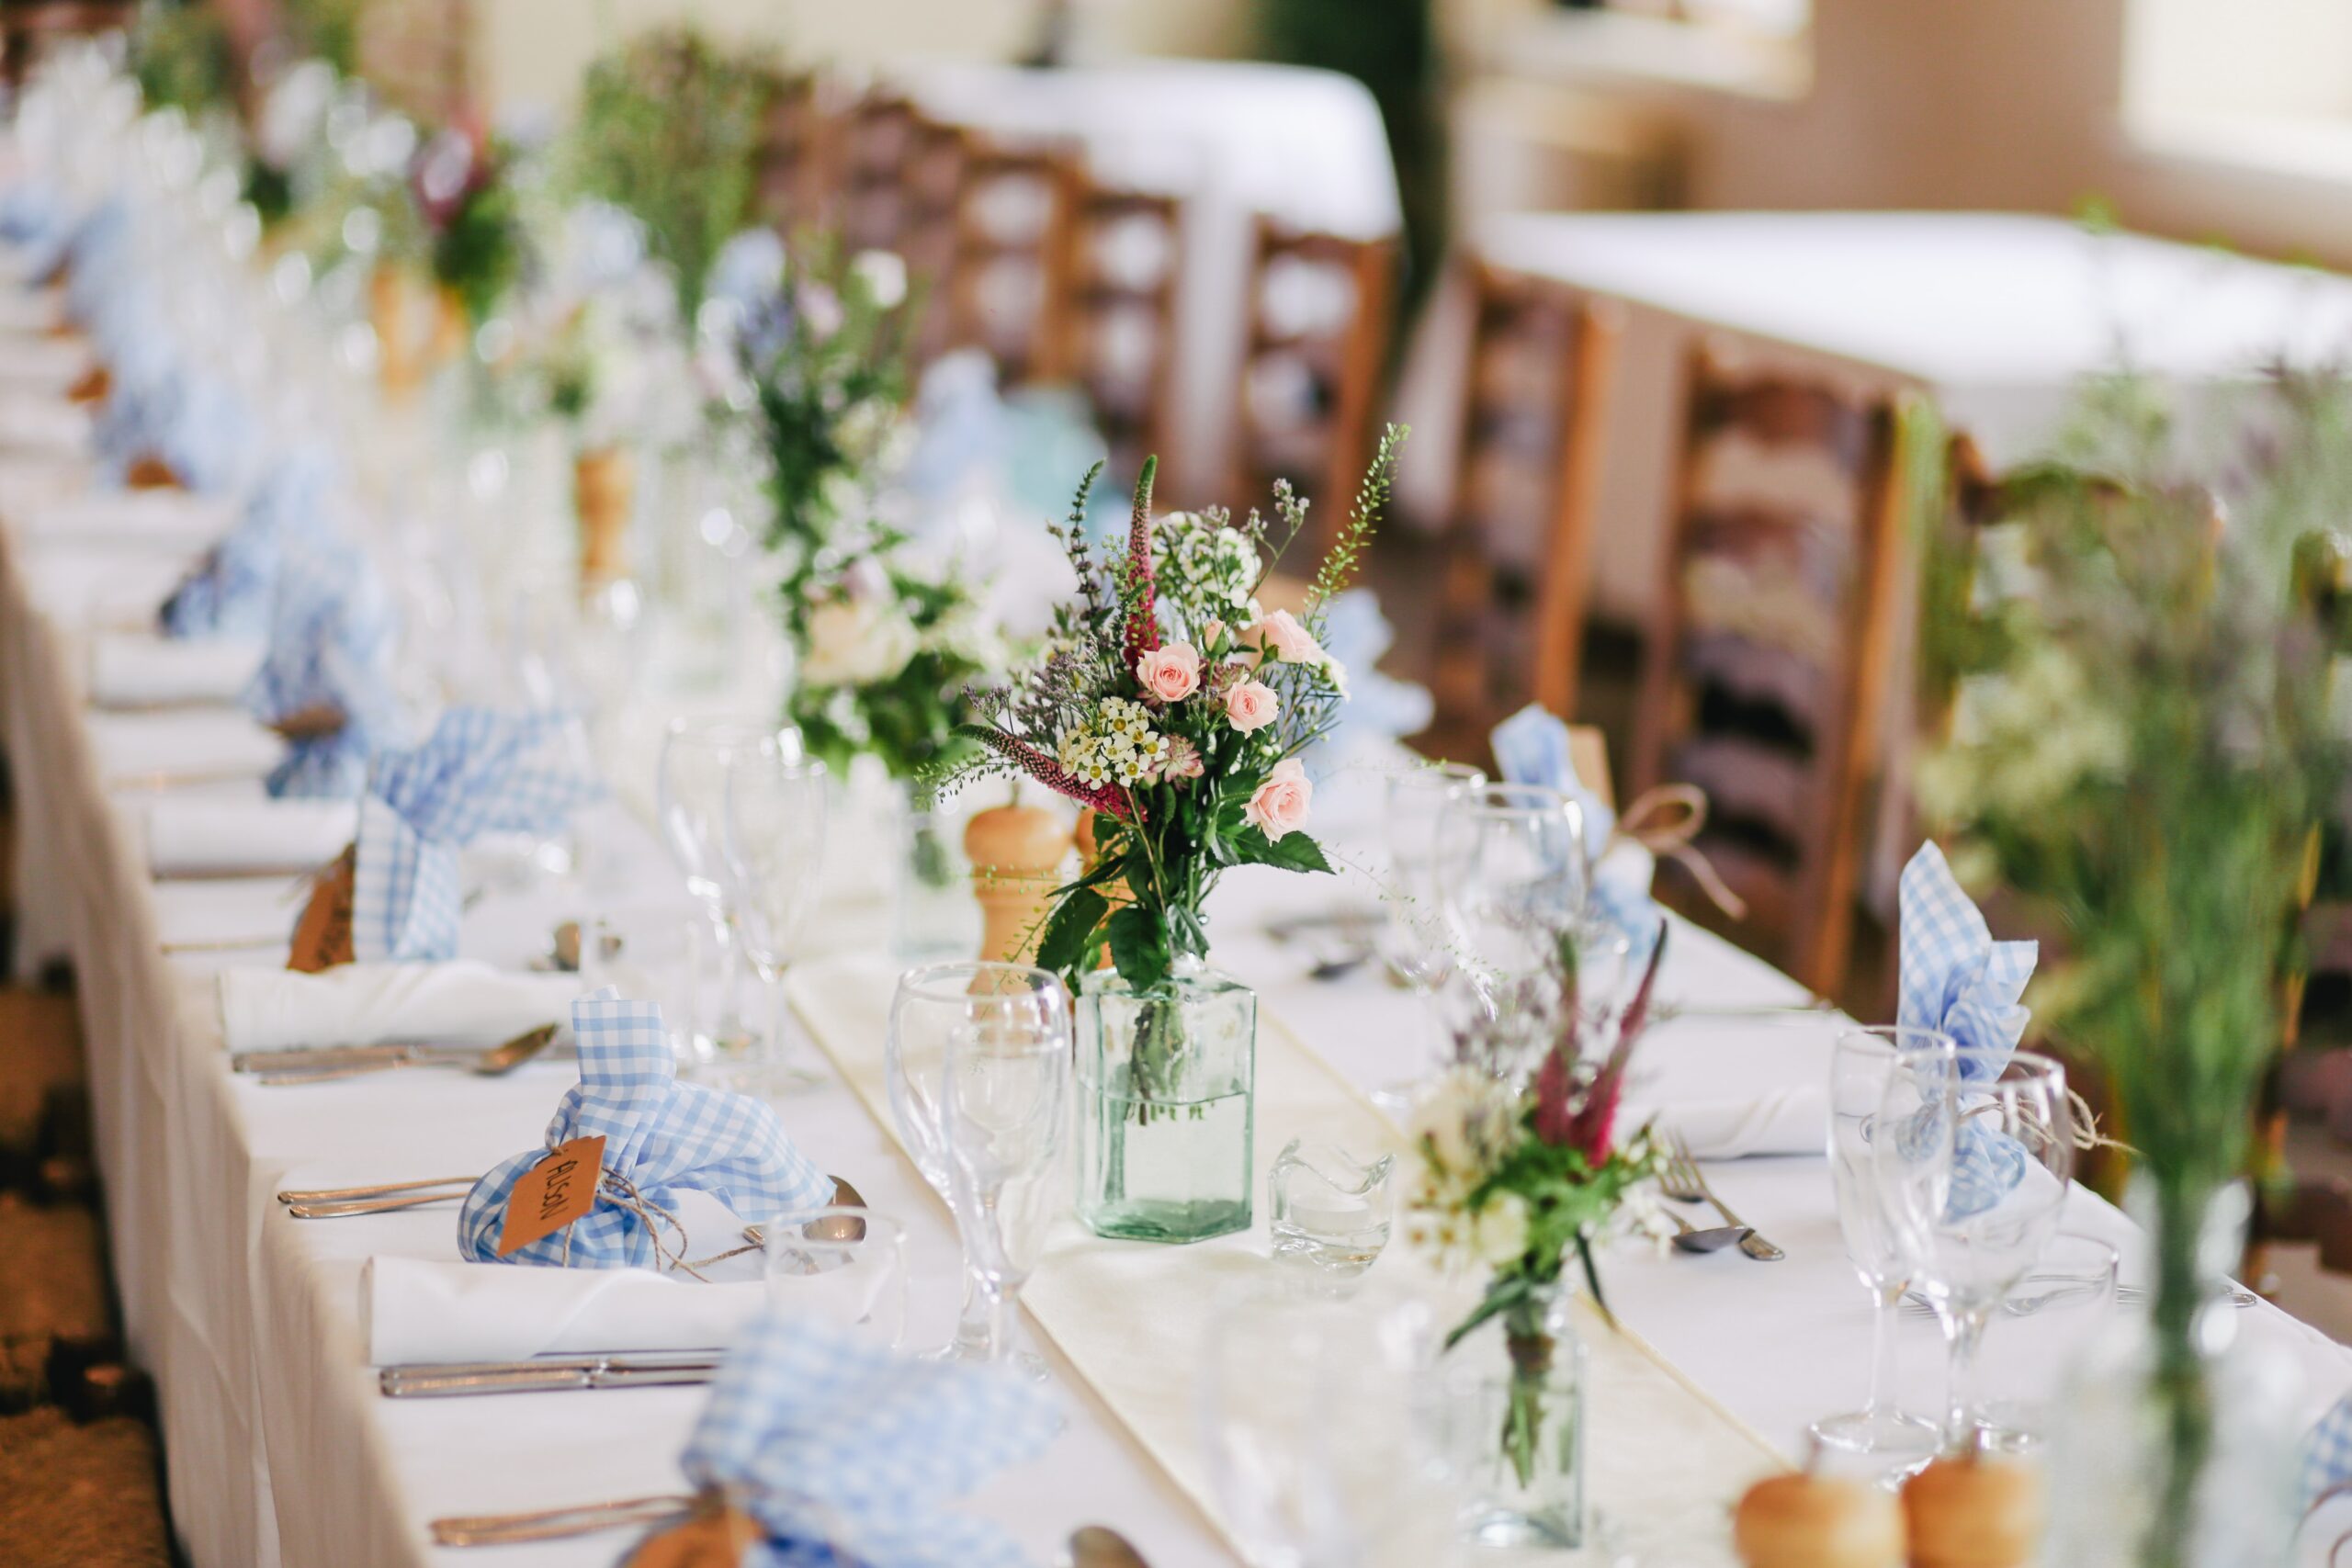 Our 5 Favourite Upscale DIY Wedding Trends